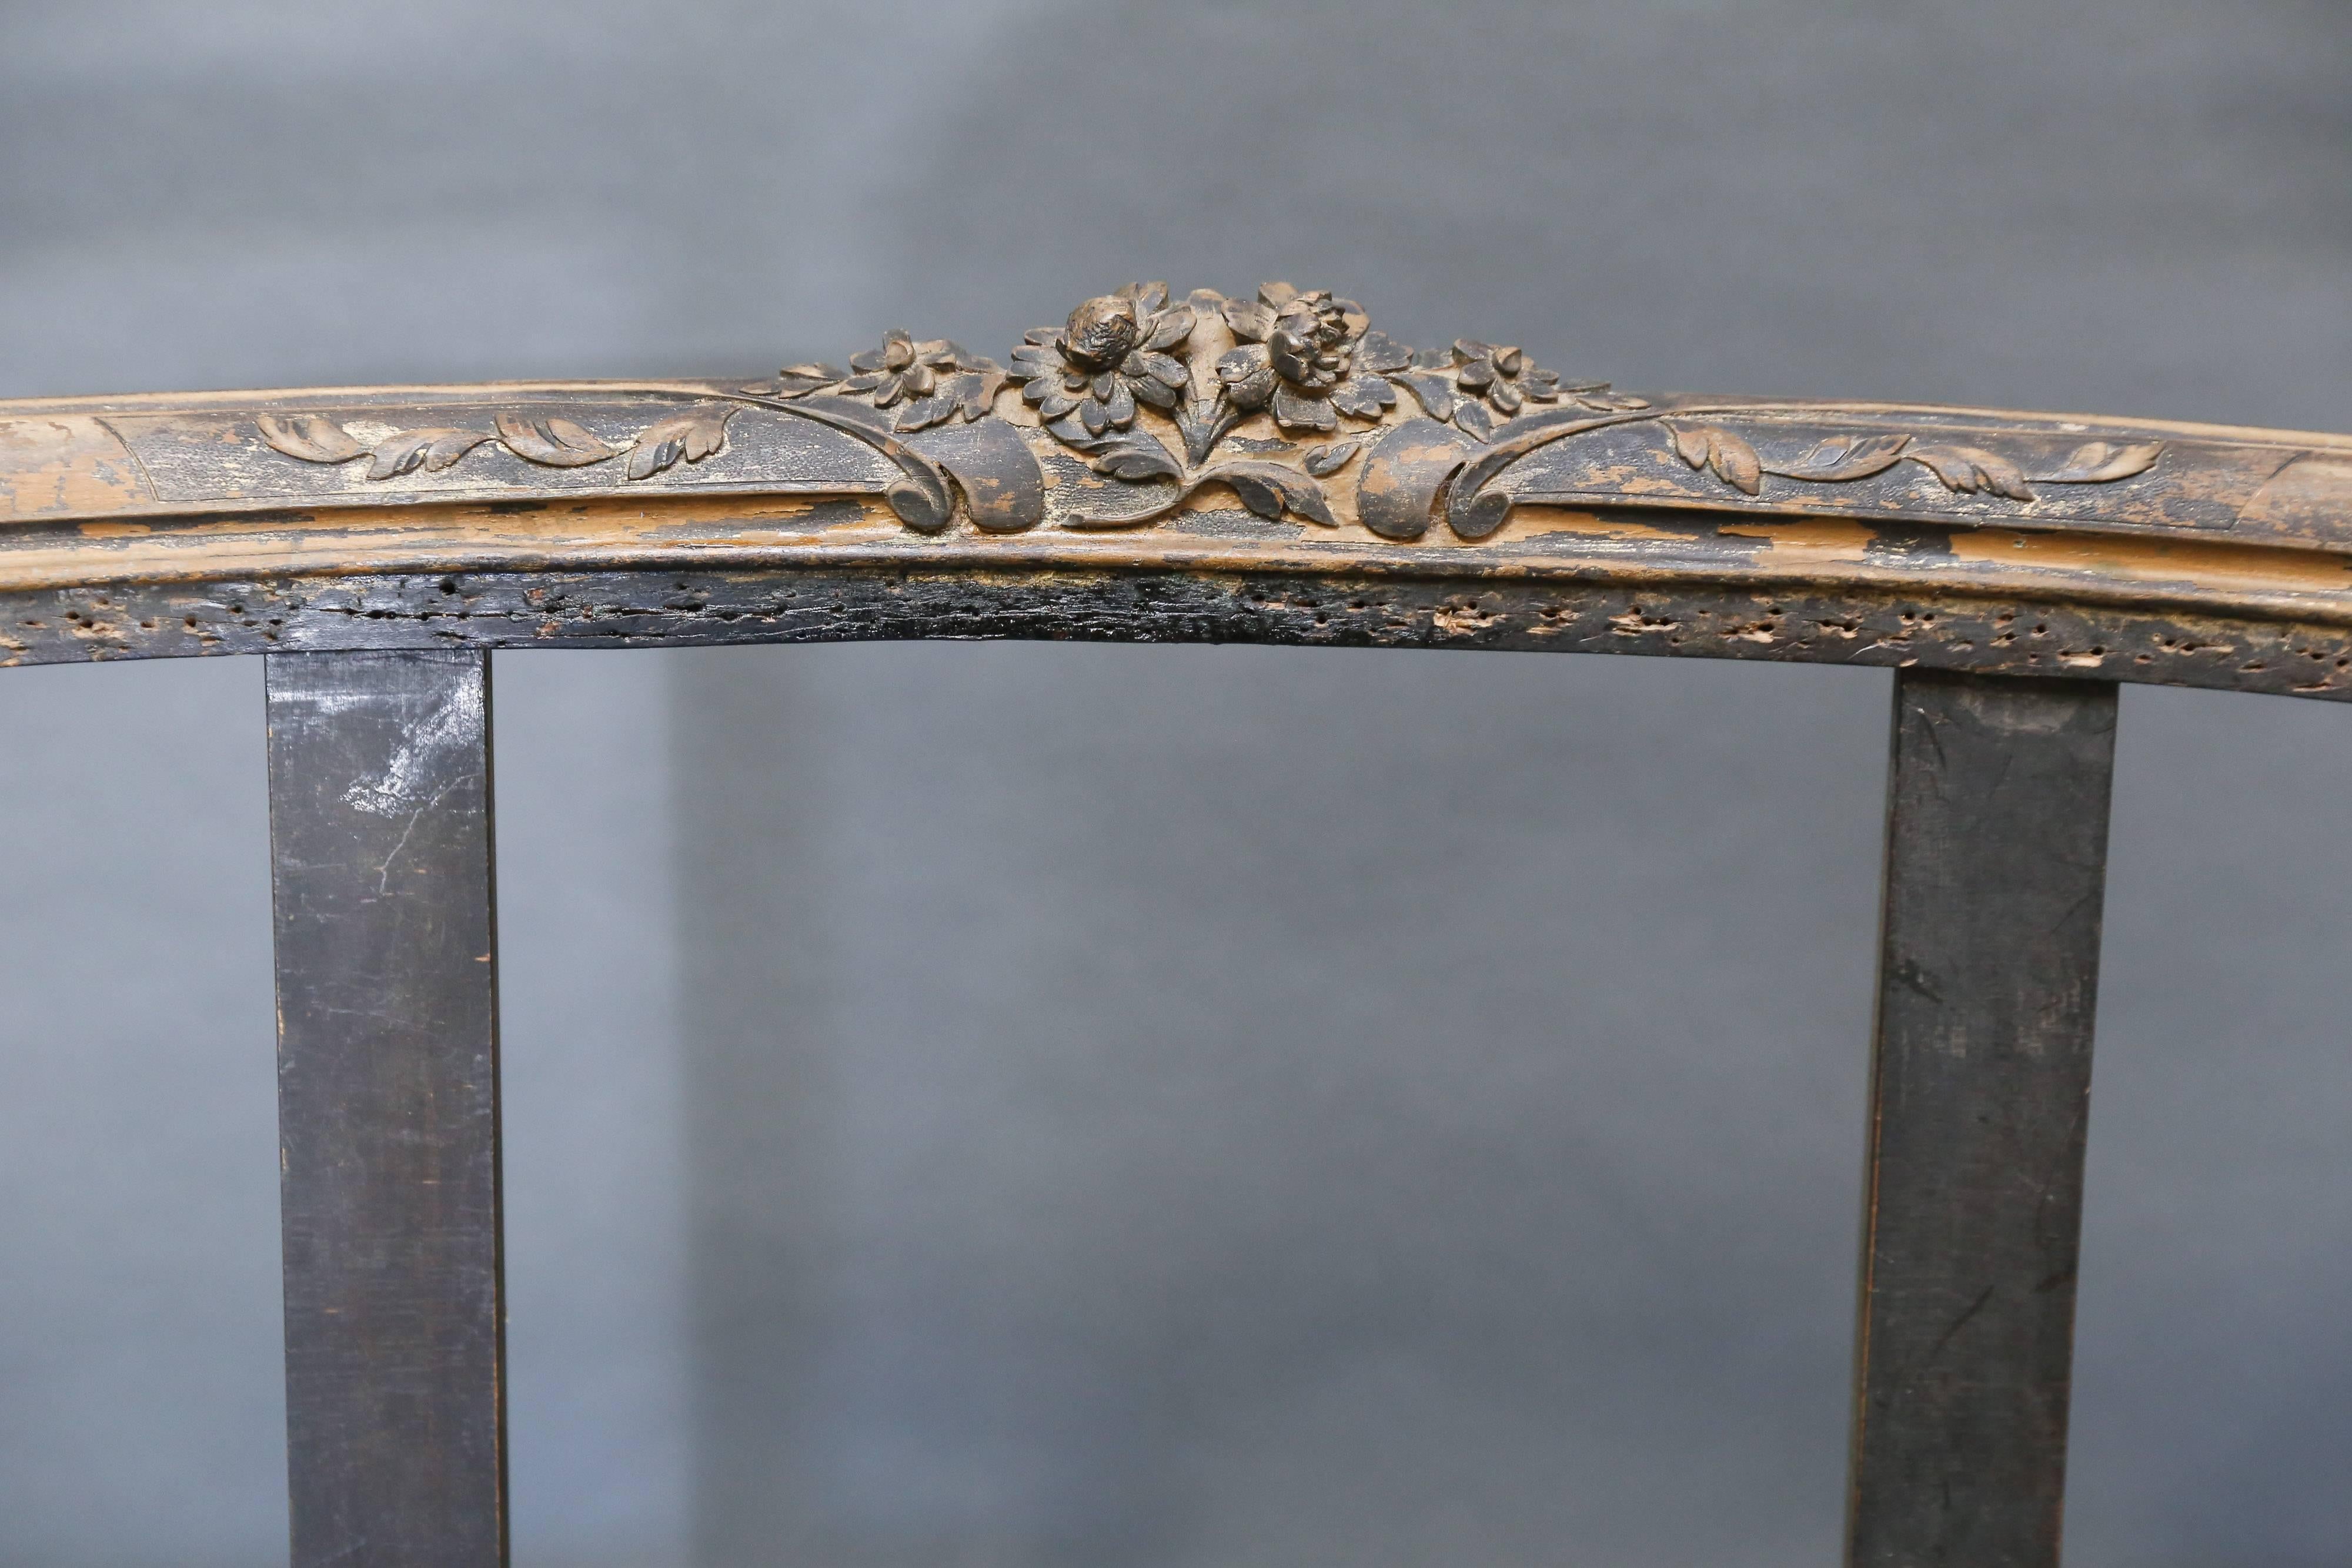 Late 18th century French settee with original paint completely reinforced and ready for reupholstering. Customers are assured that the integrity of the frame is solid. Delicately carved detail at top of crest rail and on seat frame. Shorter arms to